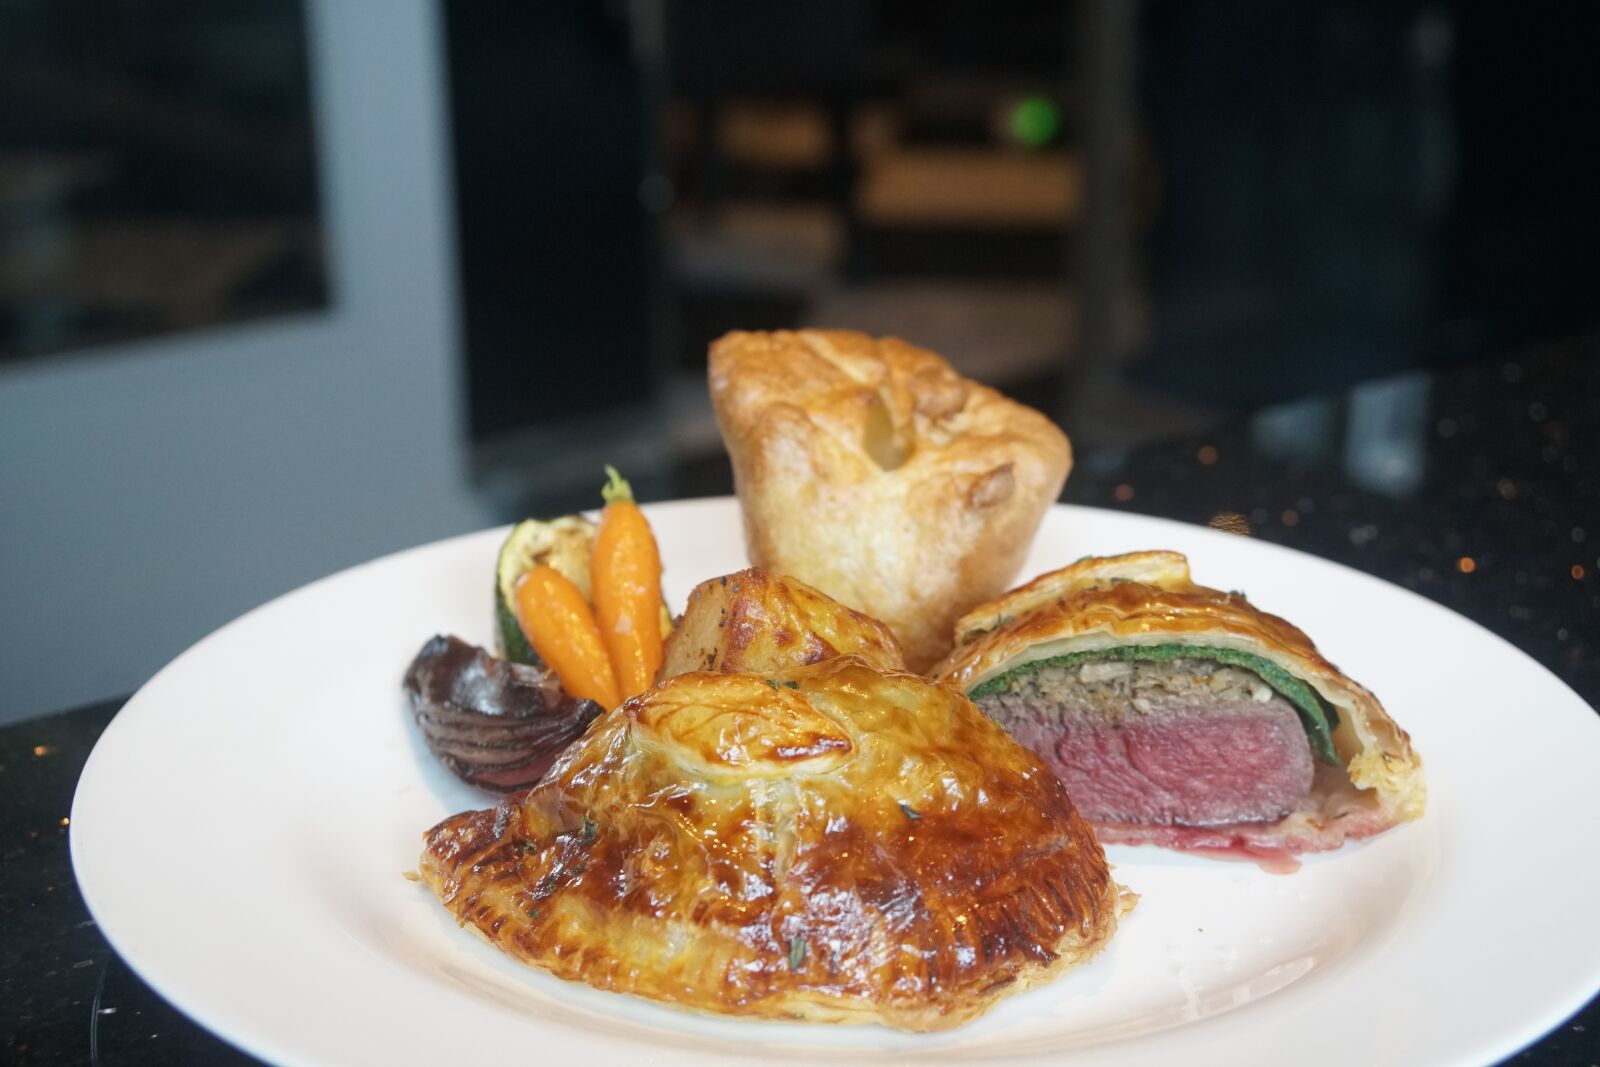 Sony a6500 sample photo. Beef wellington, beef, dinner photography